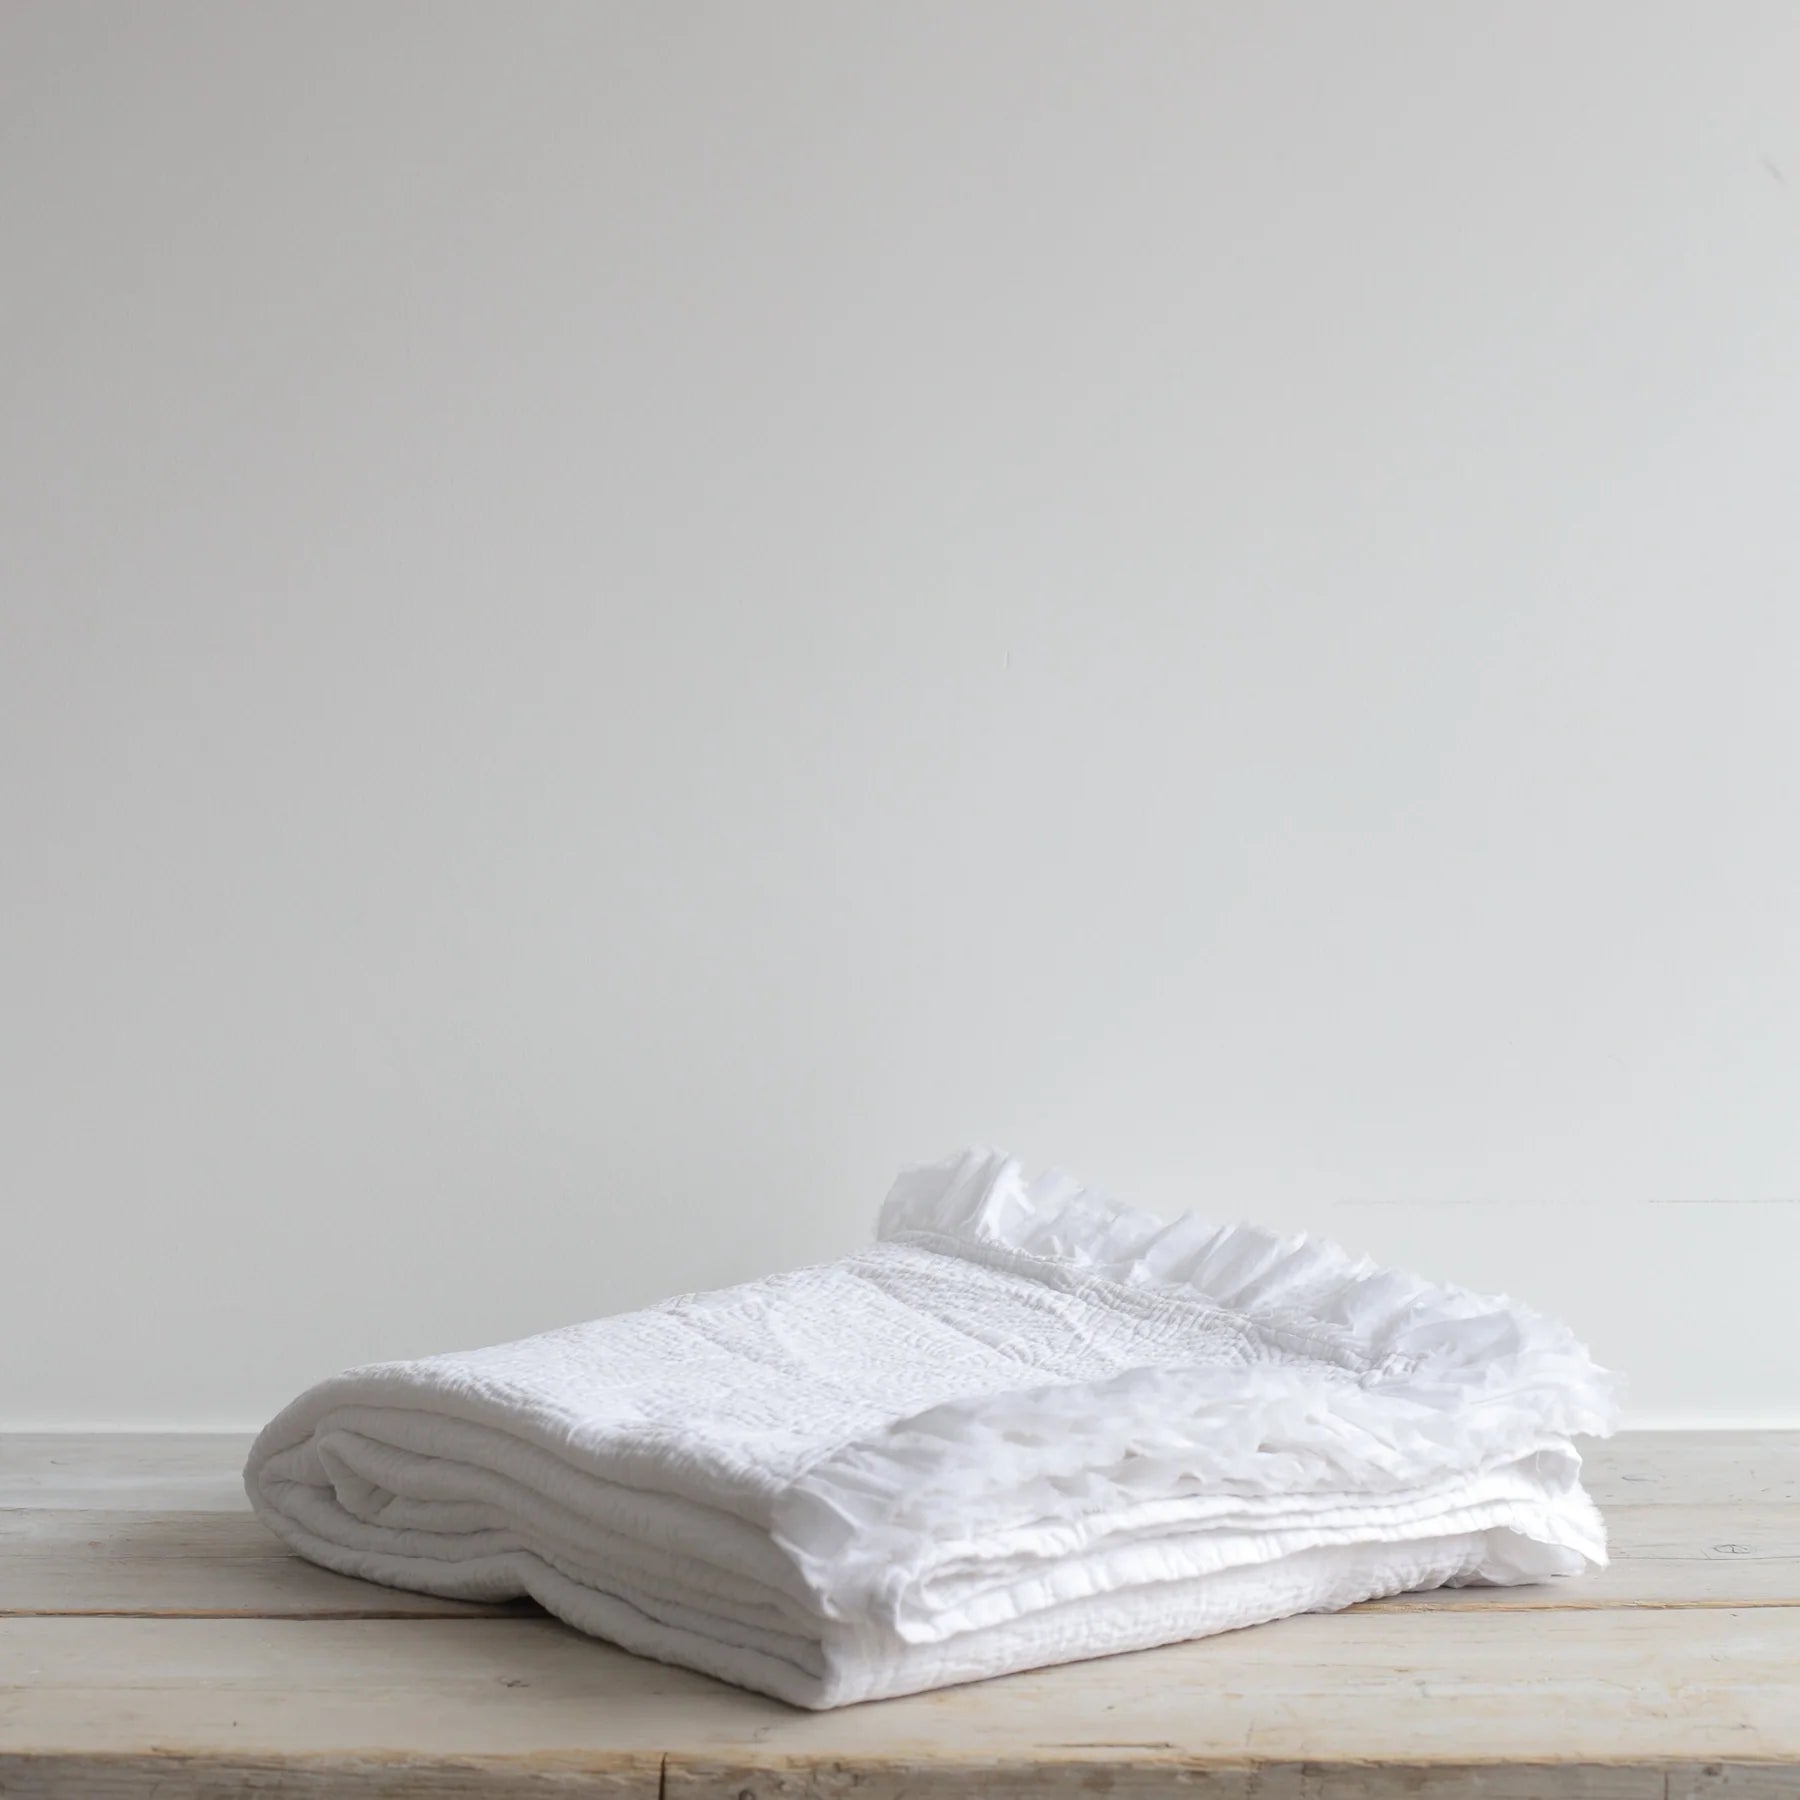 Textured White Bedspread folded neatly on a wooden table.